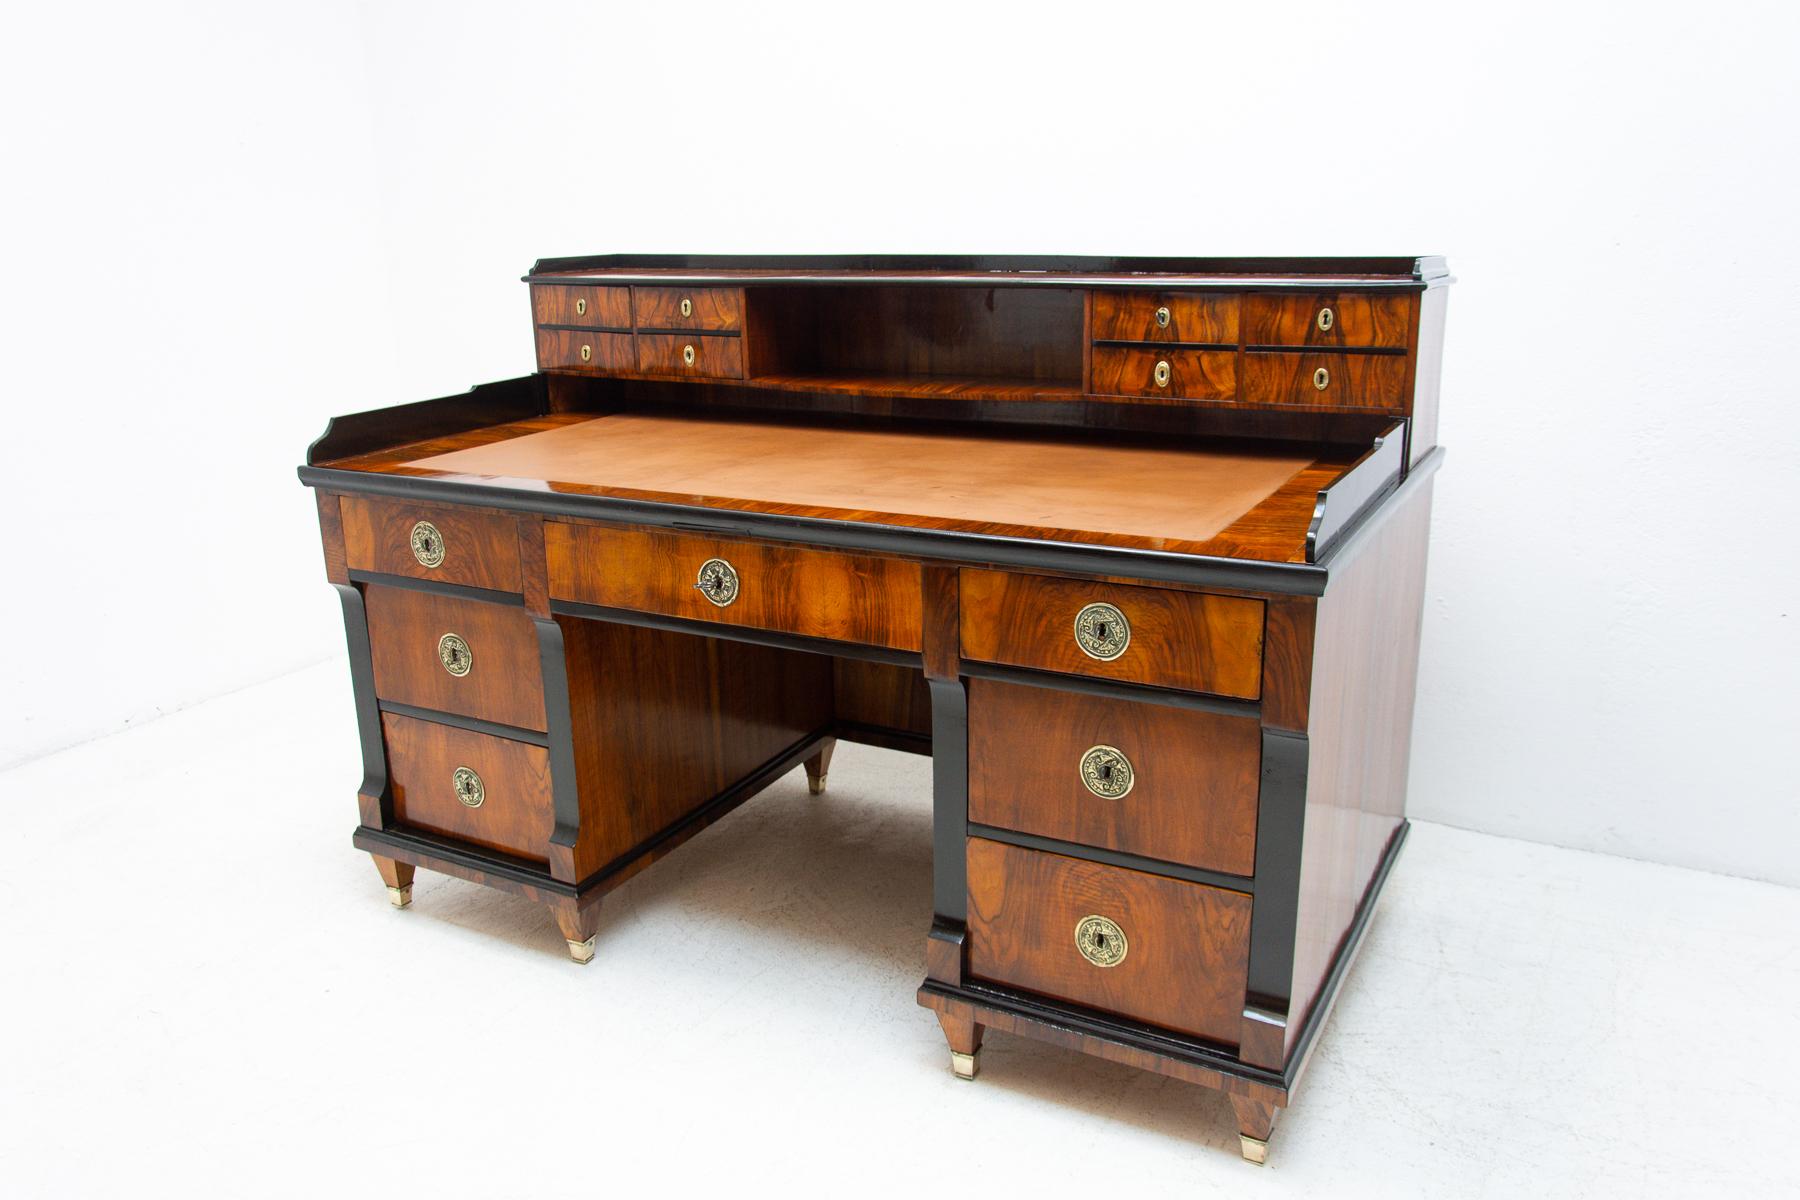 This Biedermeier writing desk was made in Austria-Hungary, circa 1830. It is made of walnut wood. The table is characterized by traditional elements of this style. Brass decorative elements are fitted on the door front. The table is in excellent